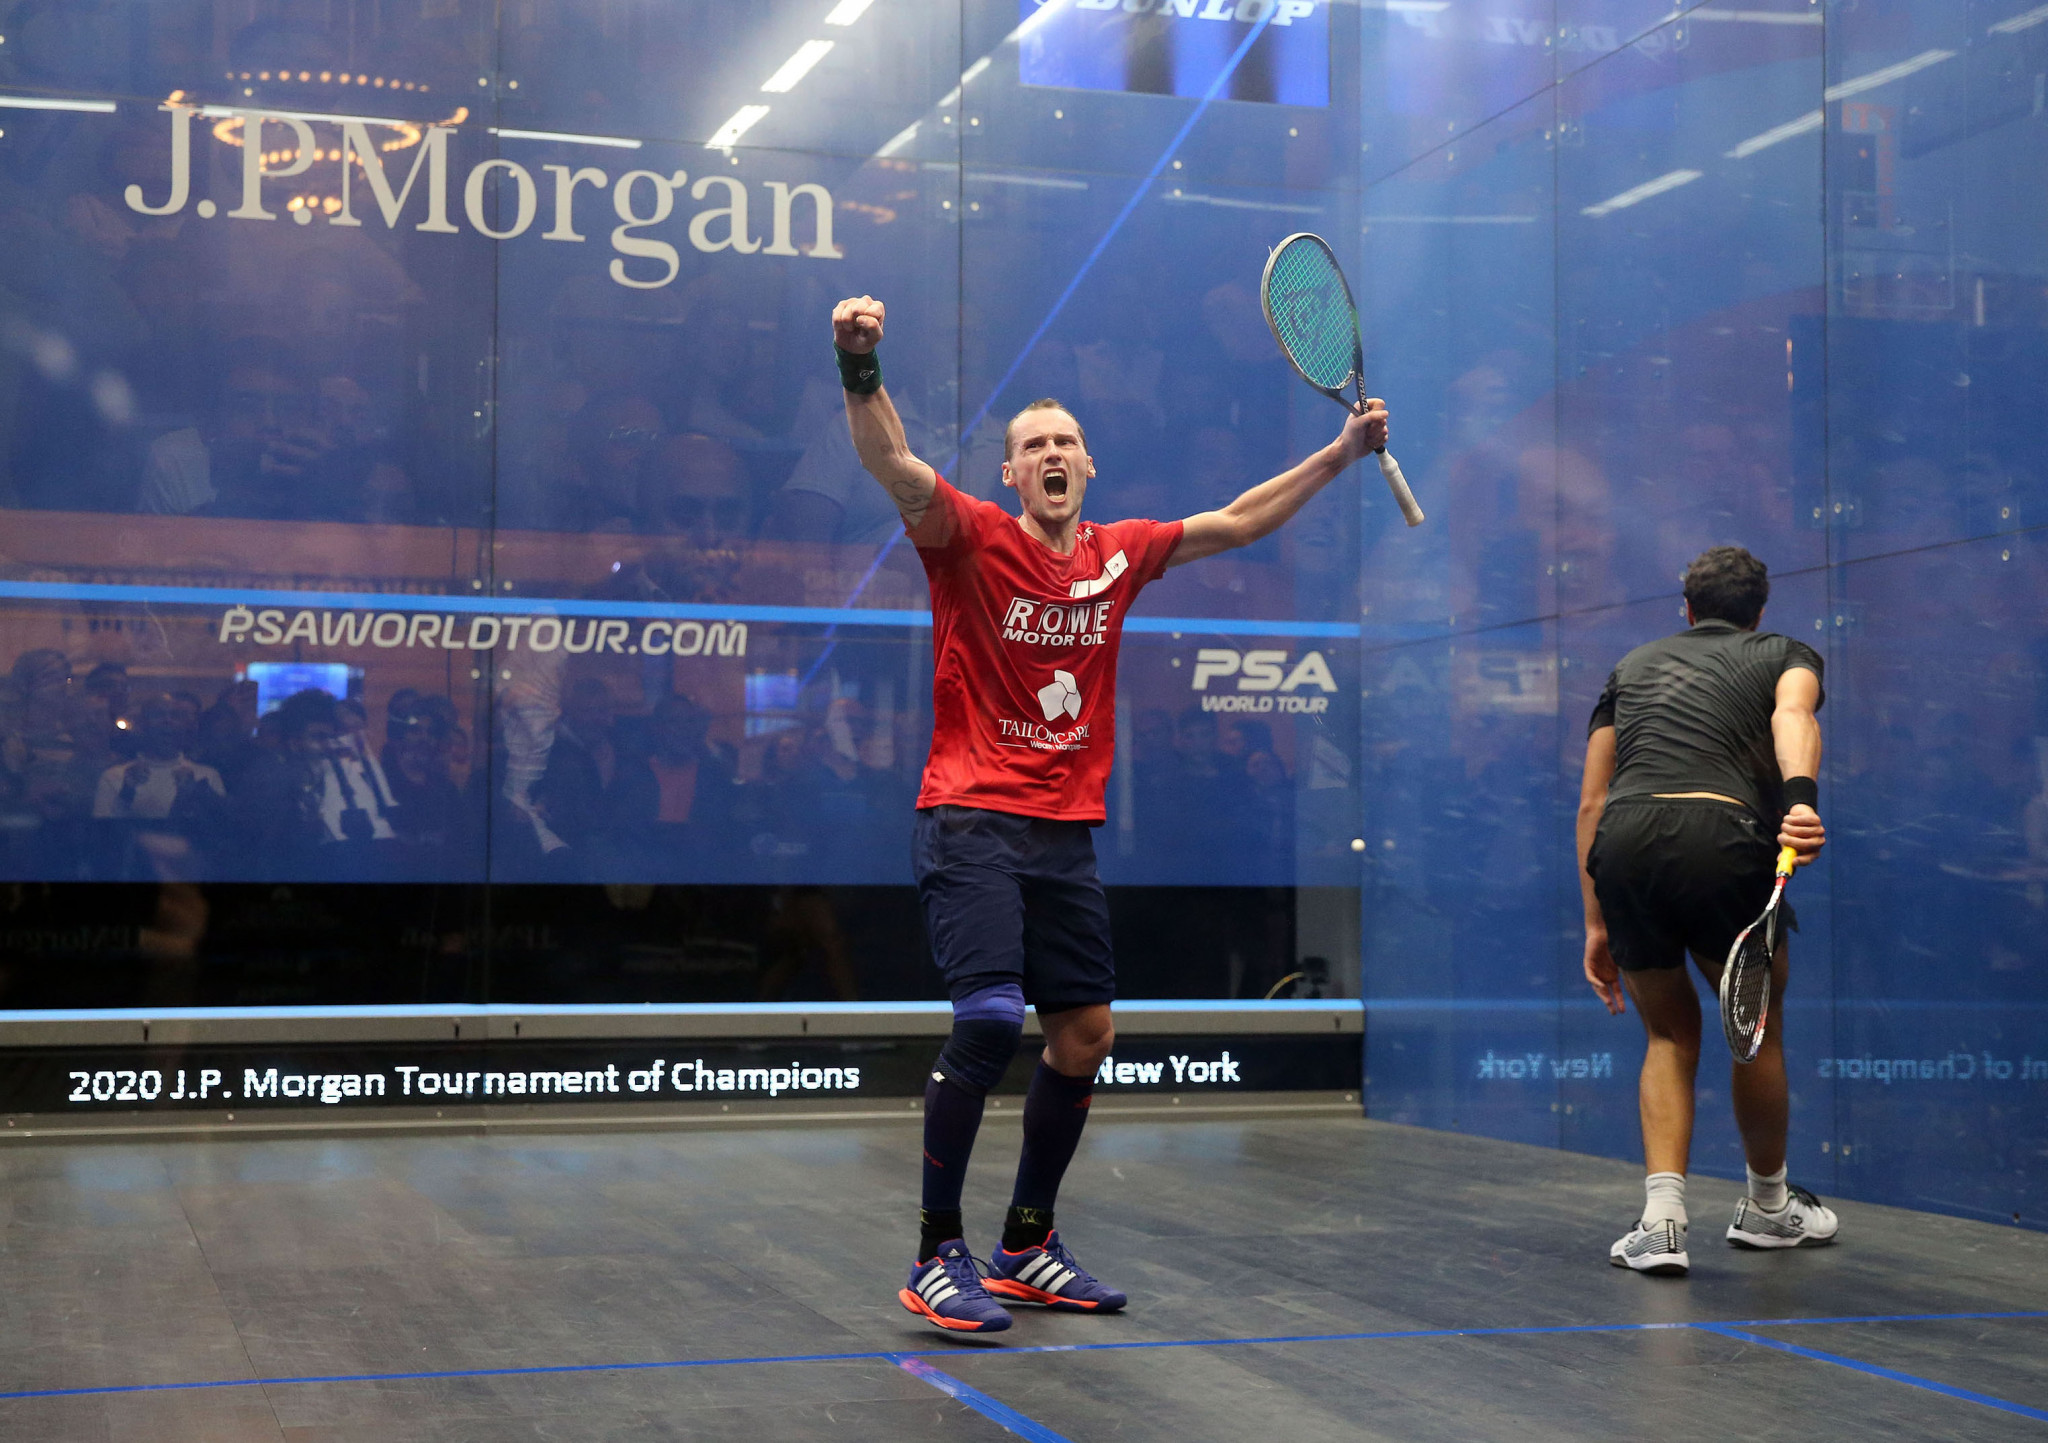 Former world number one Gregory Gaultier made a triumphant return to action at the J.P. Morgan Tournament of Champions in New York City ©PSA